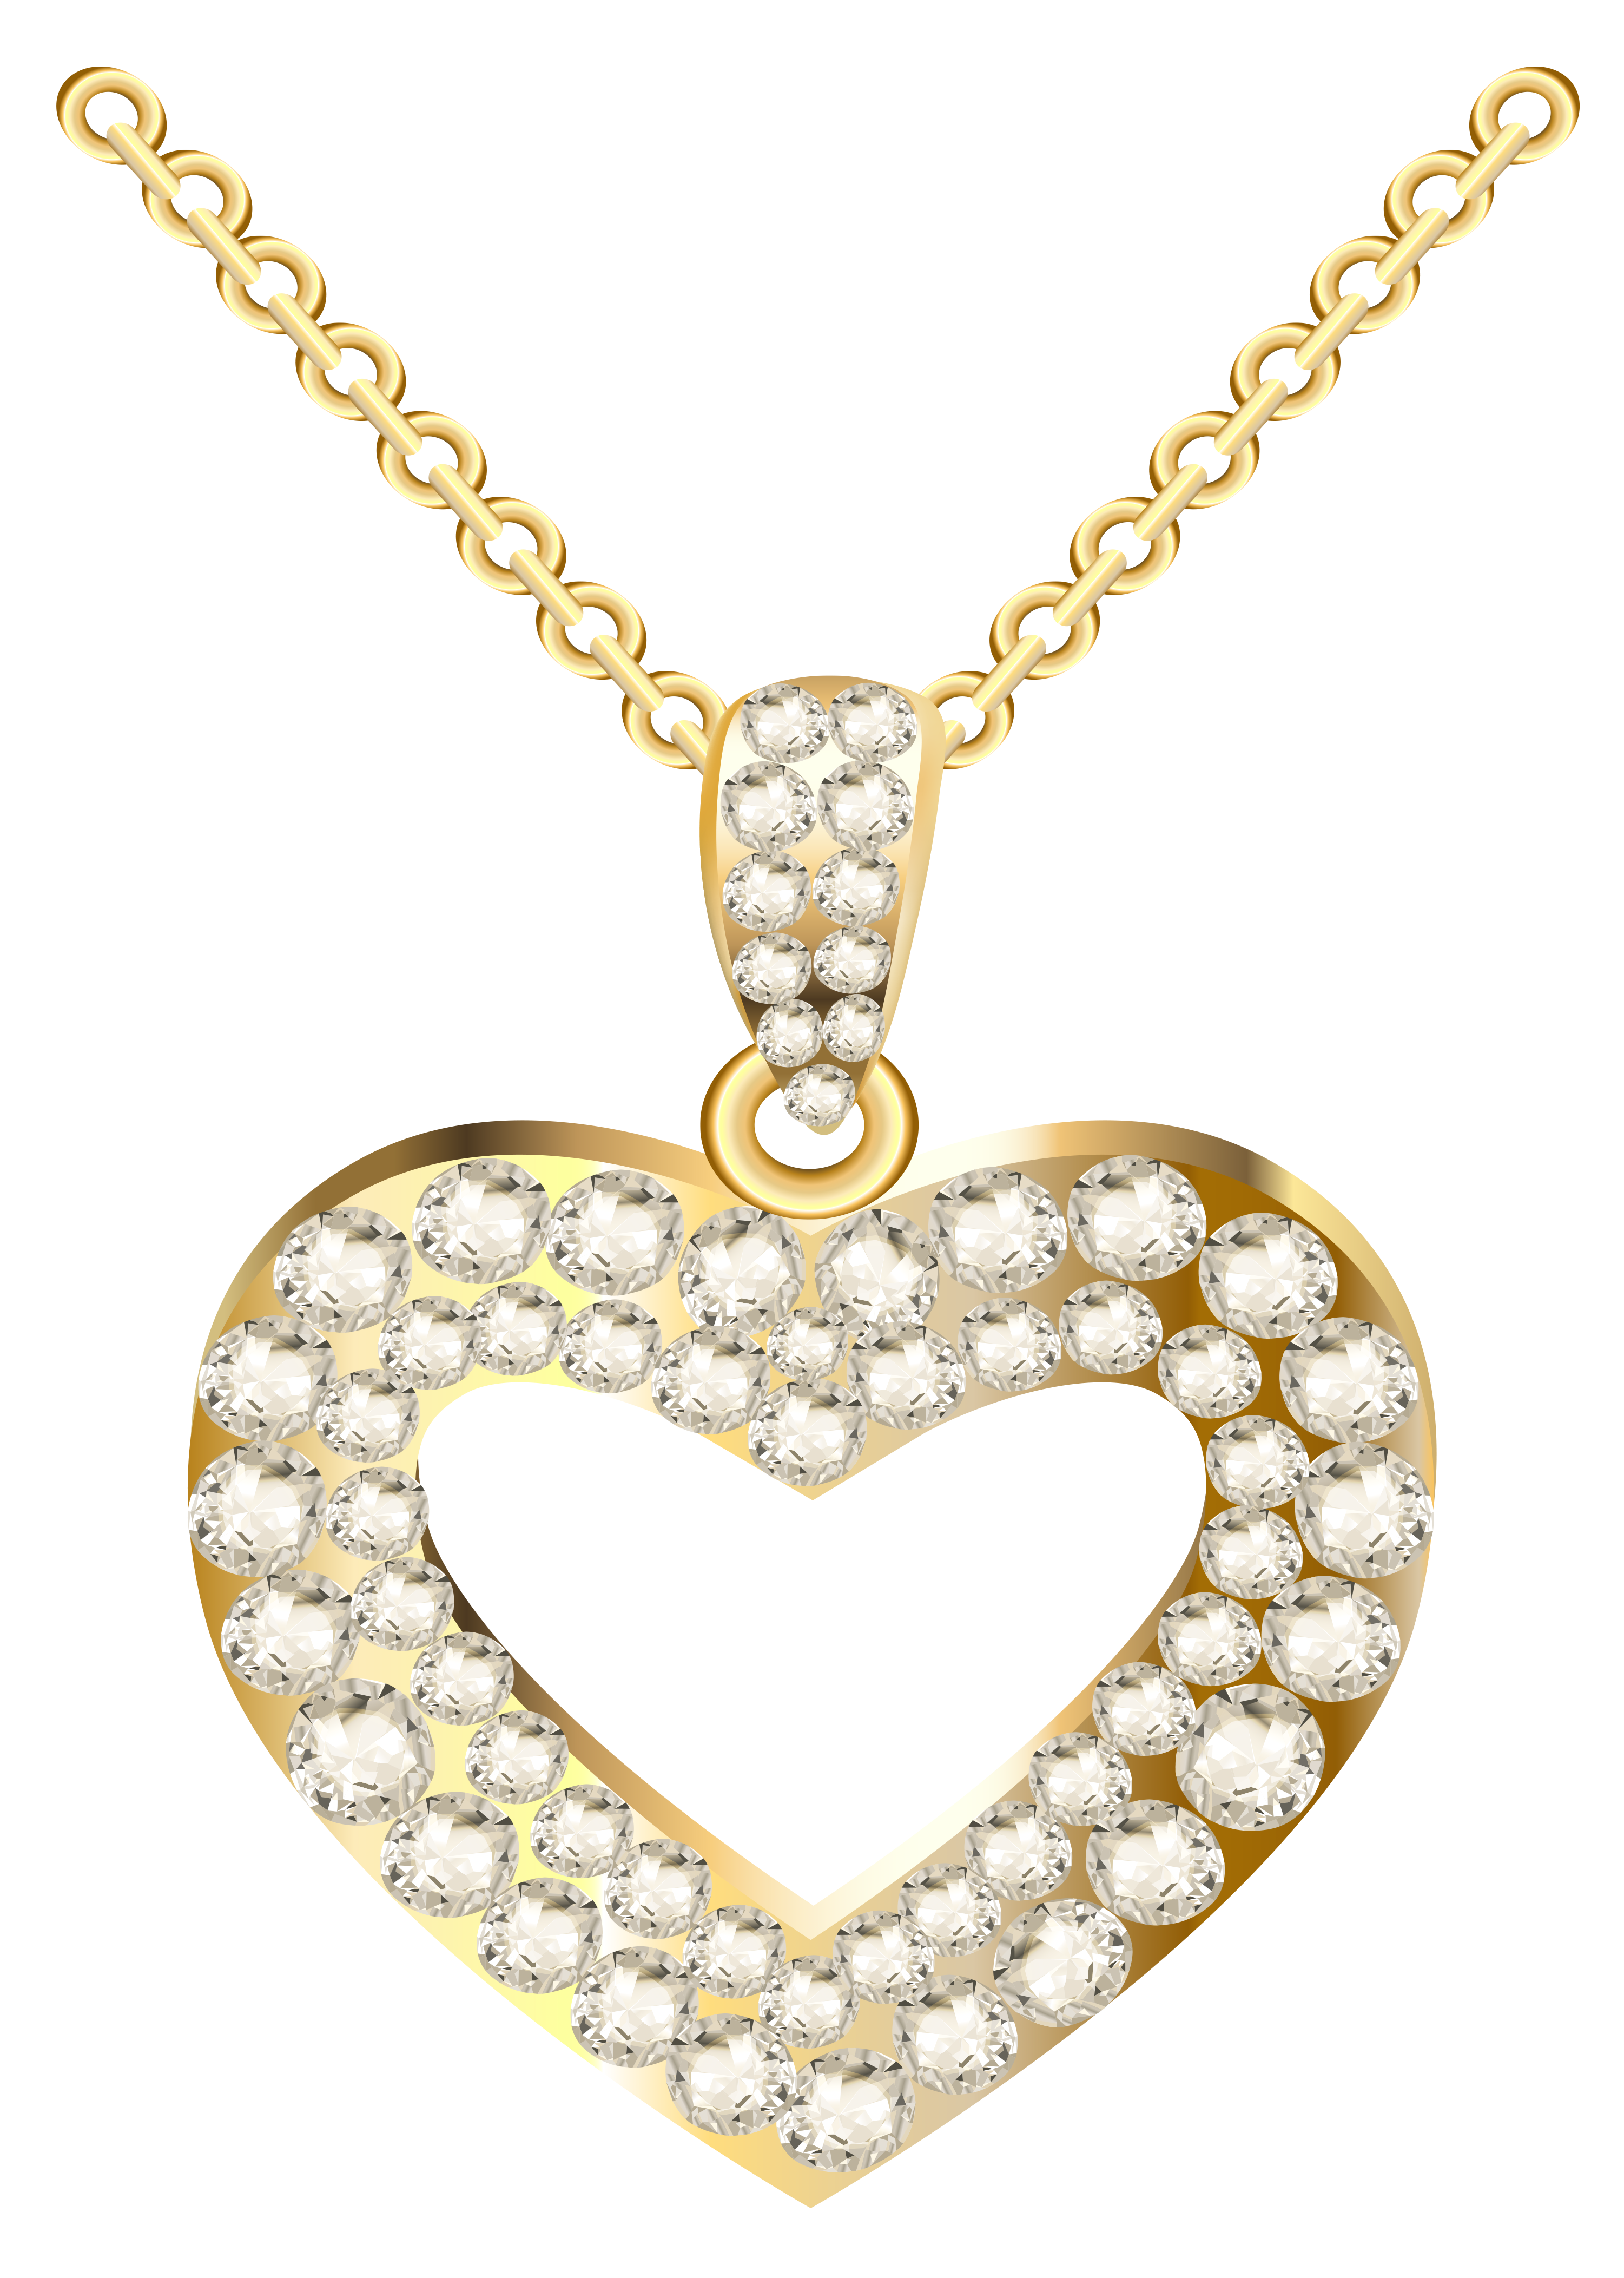 Picture #1855411 - pearls clipart bling necklace. pearls clipart bling neck...